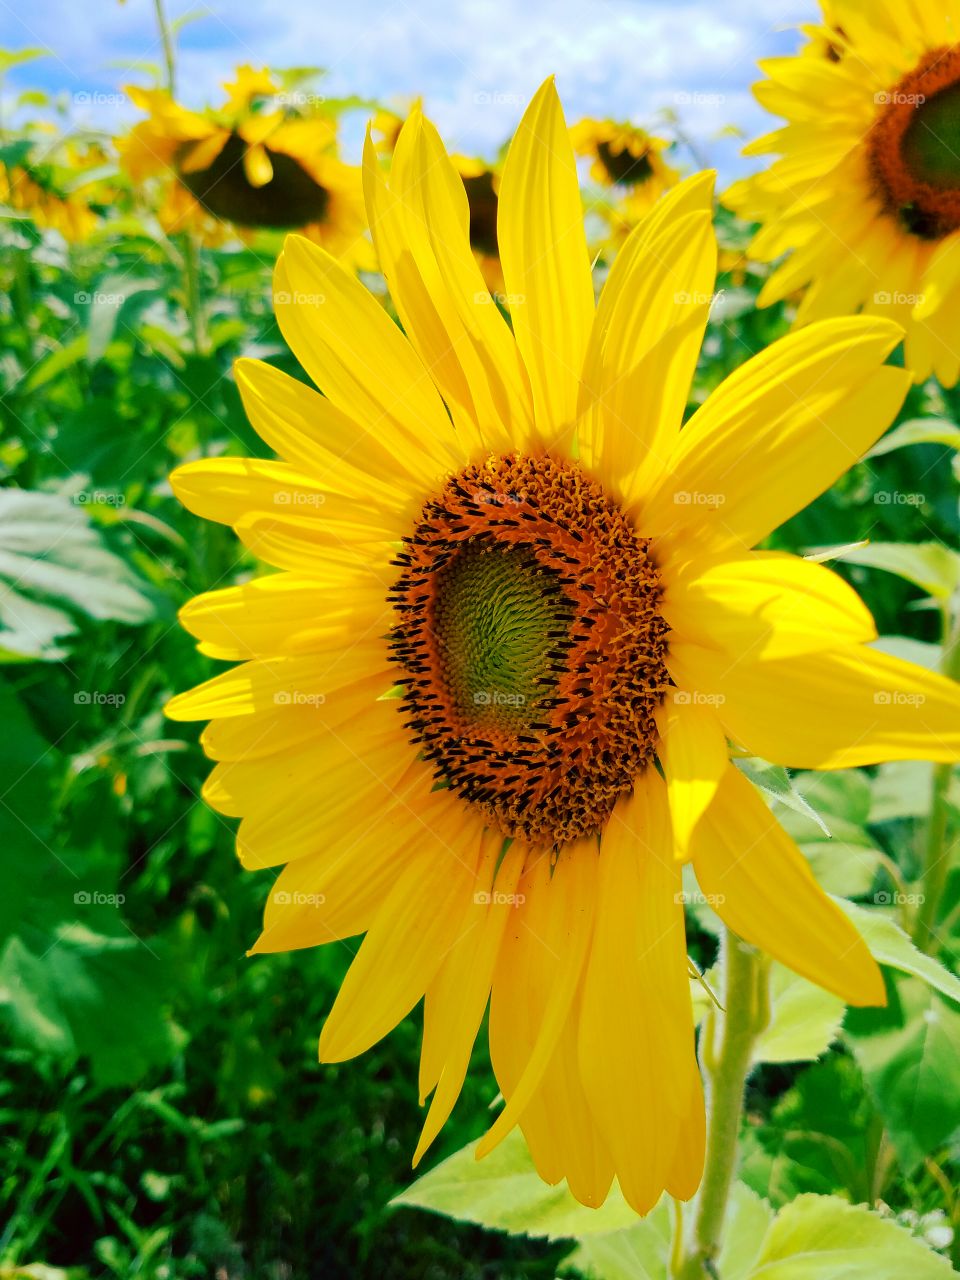 Side view of a sunflower